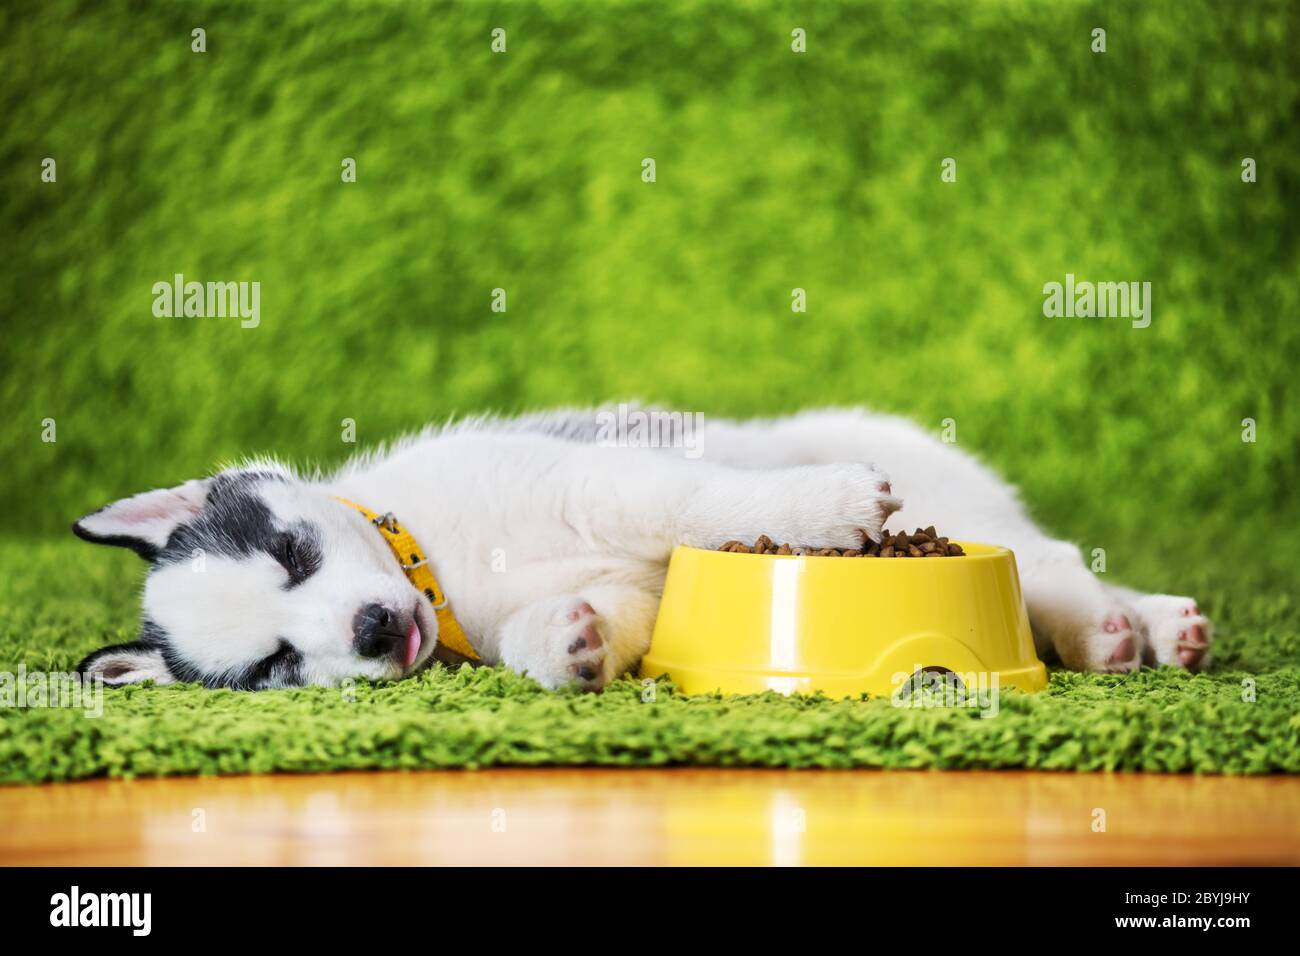 A small white dog puppy breed siberian husky with yellow feeder with dry dogs food lays on green carpet. Dogs and pet photography Stock Photo